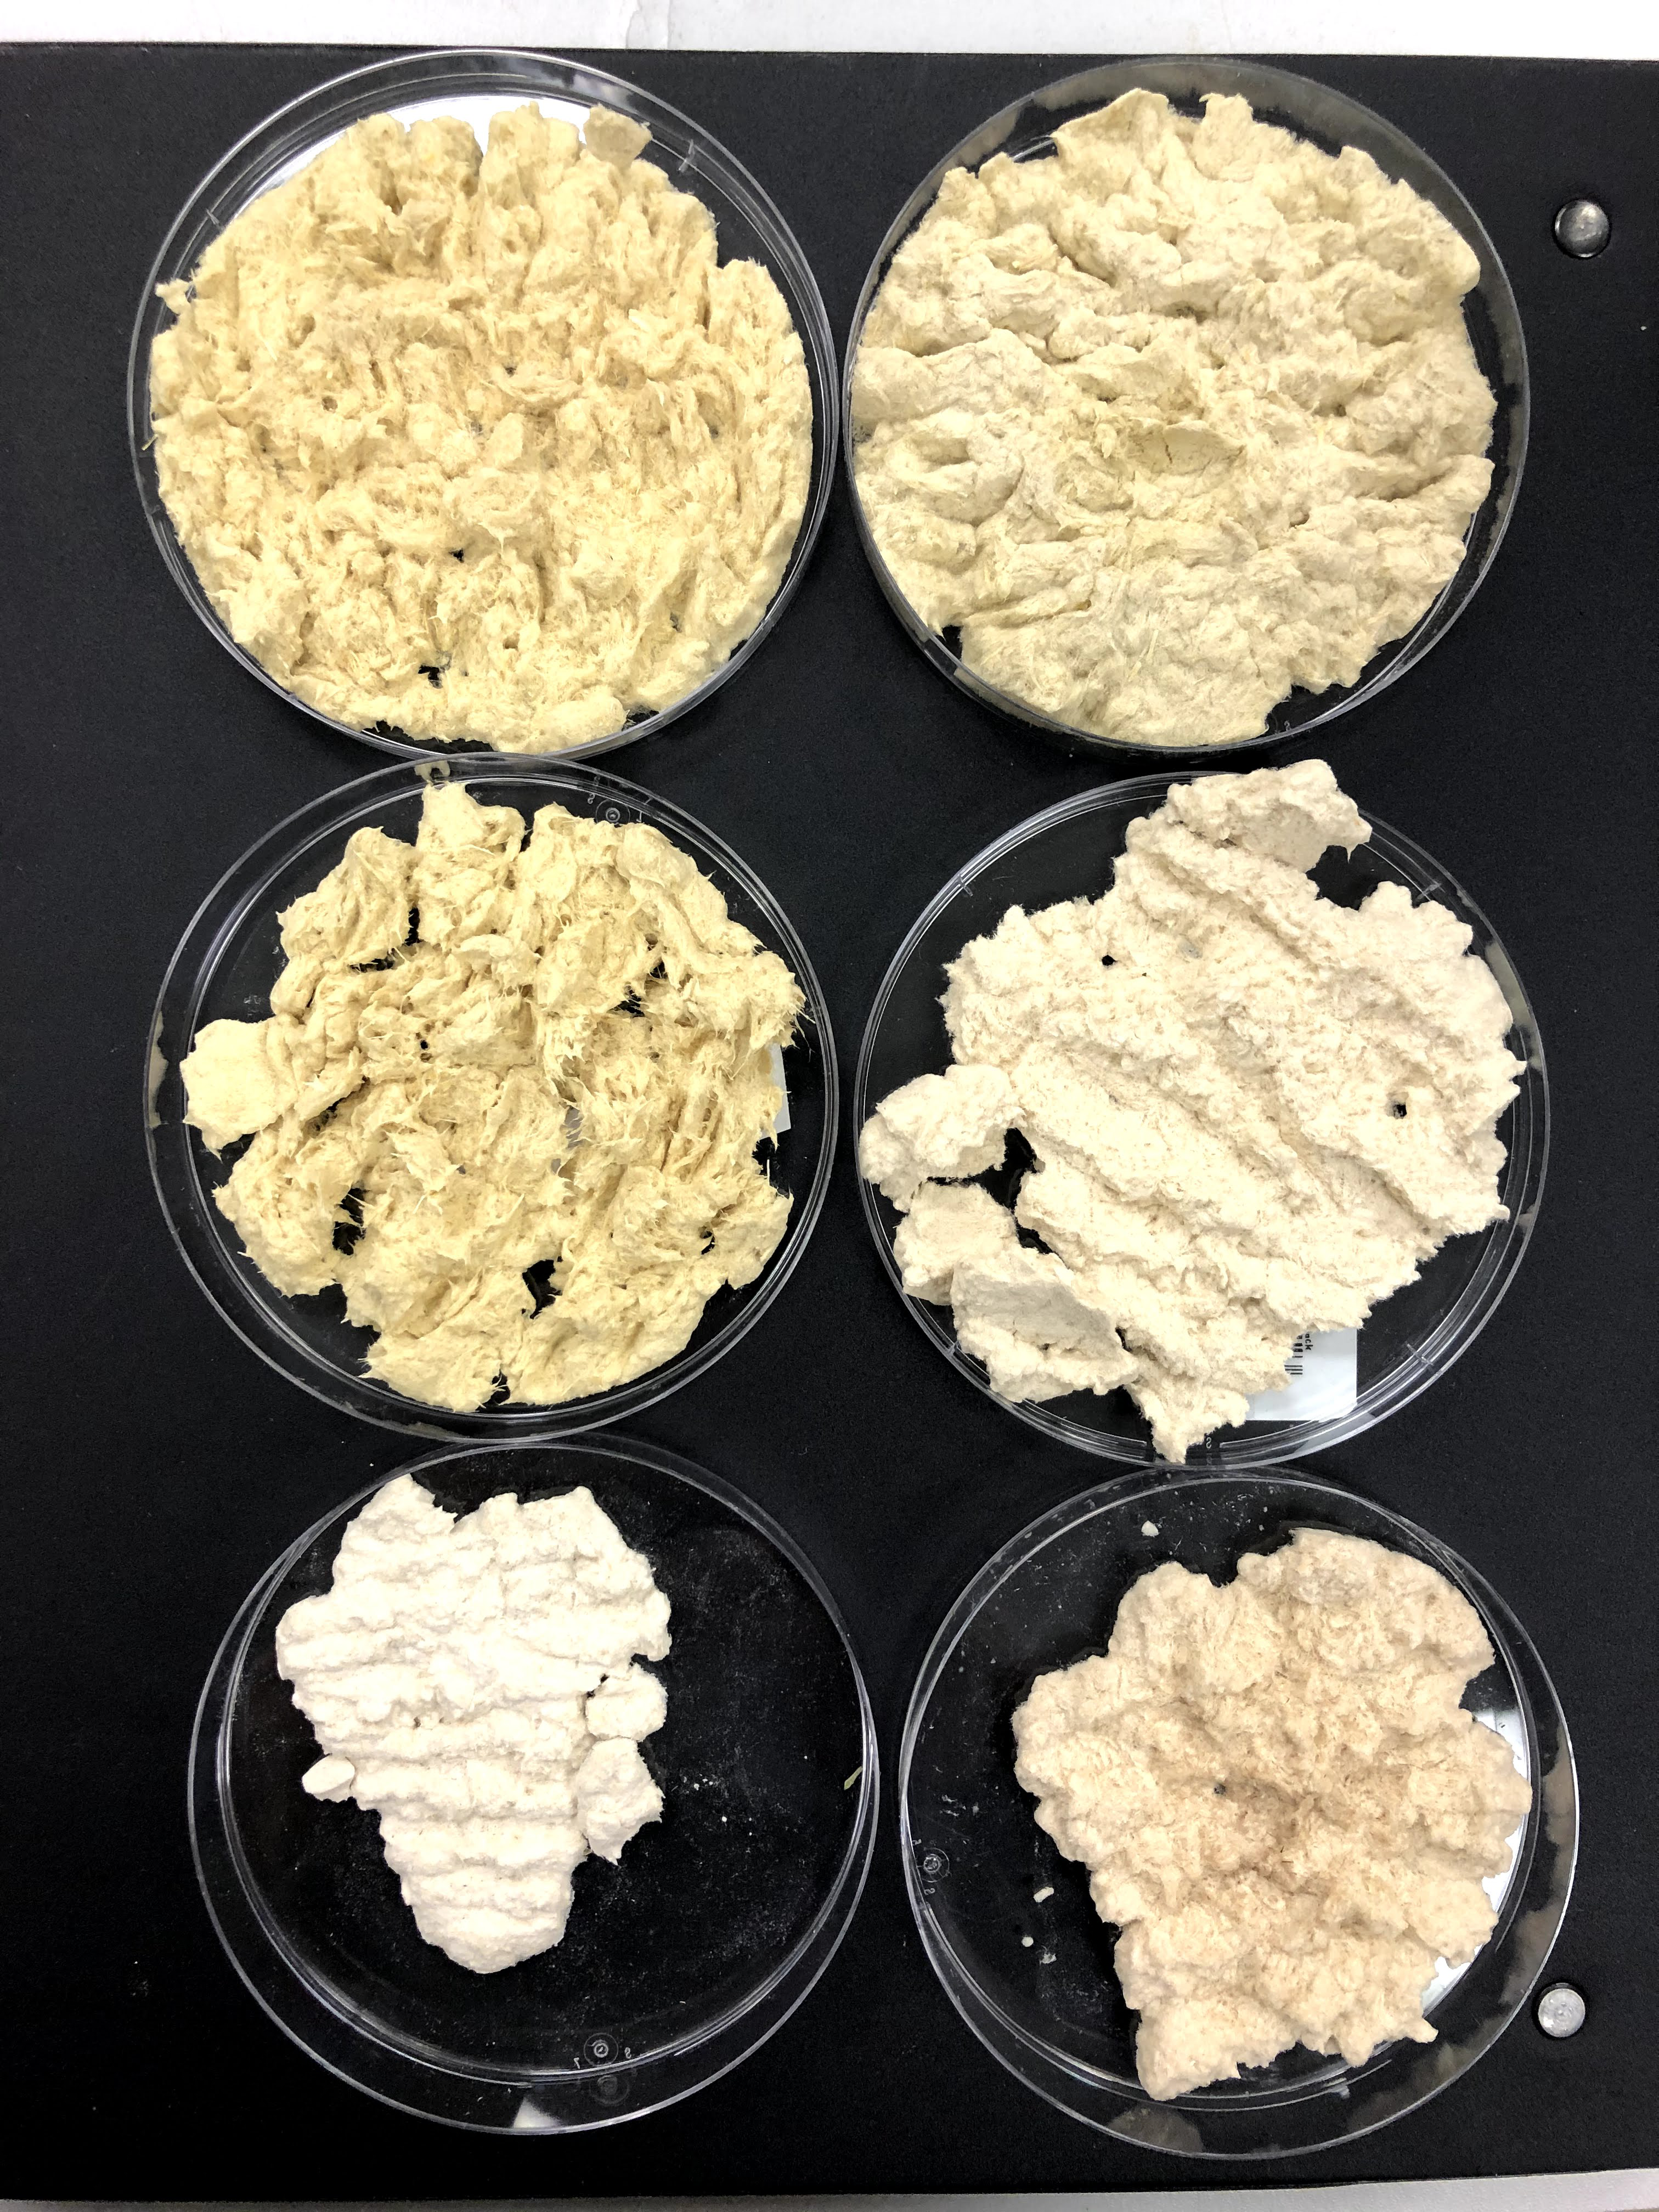 Cellulose fibres from three different locally grown agricultural biomasses - miscanthus grass, switchgrass and wheat straw. 